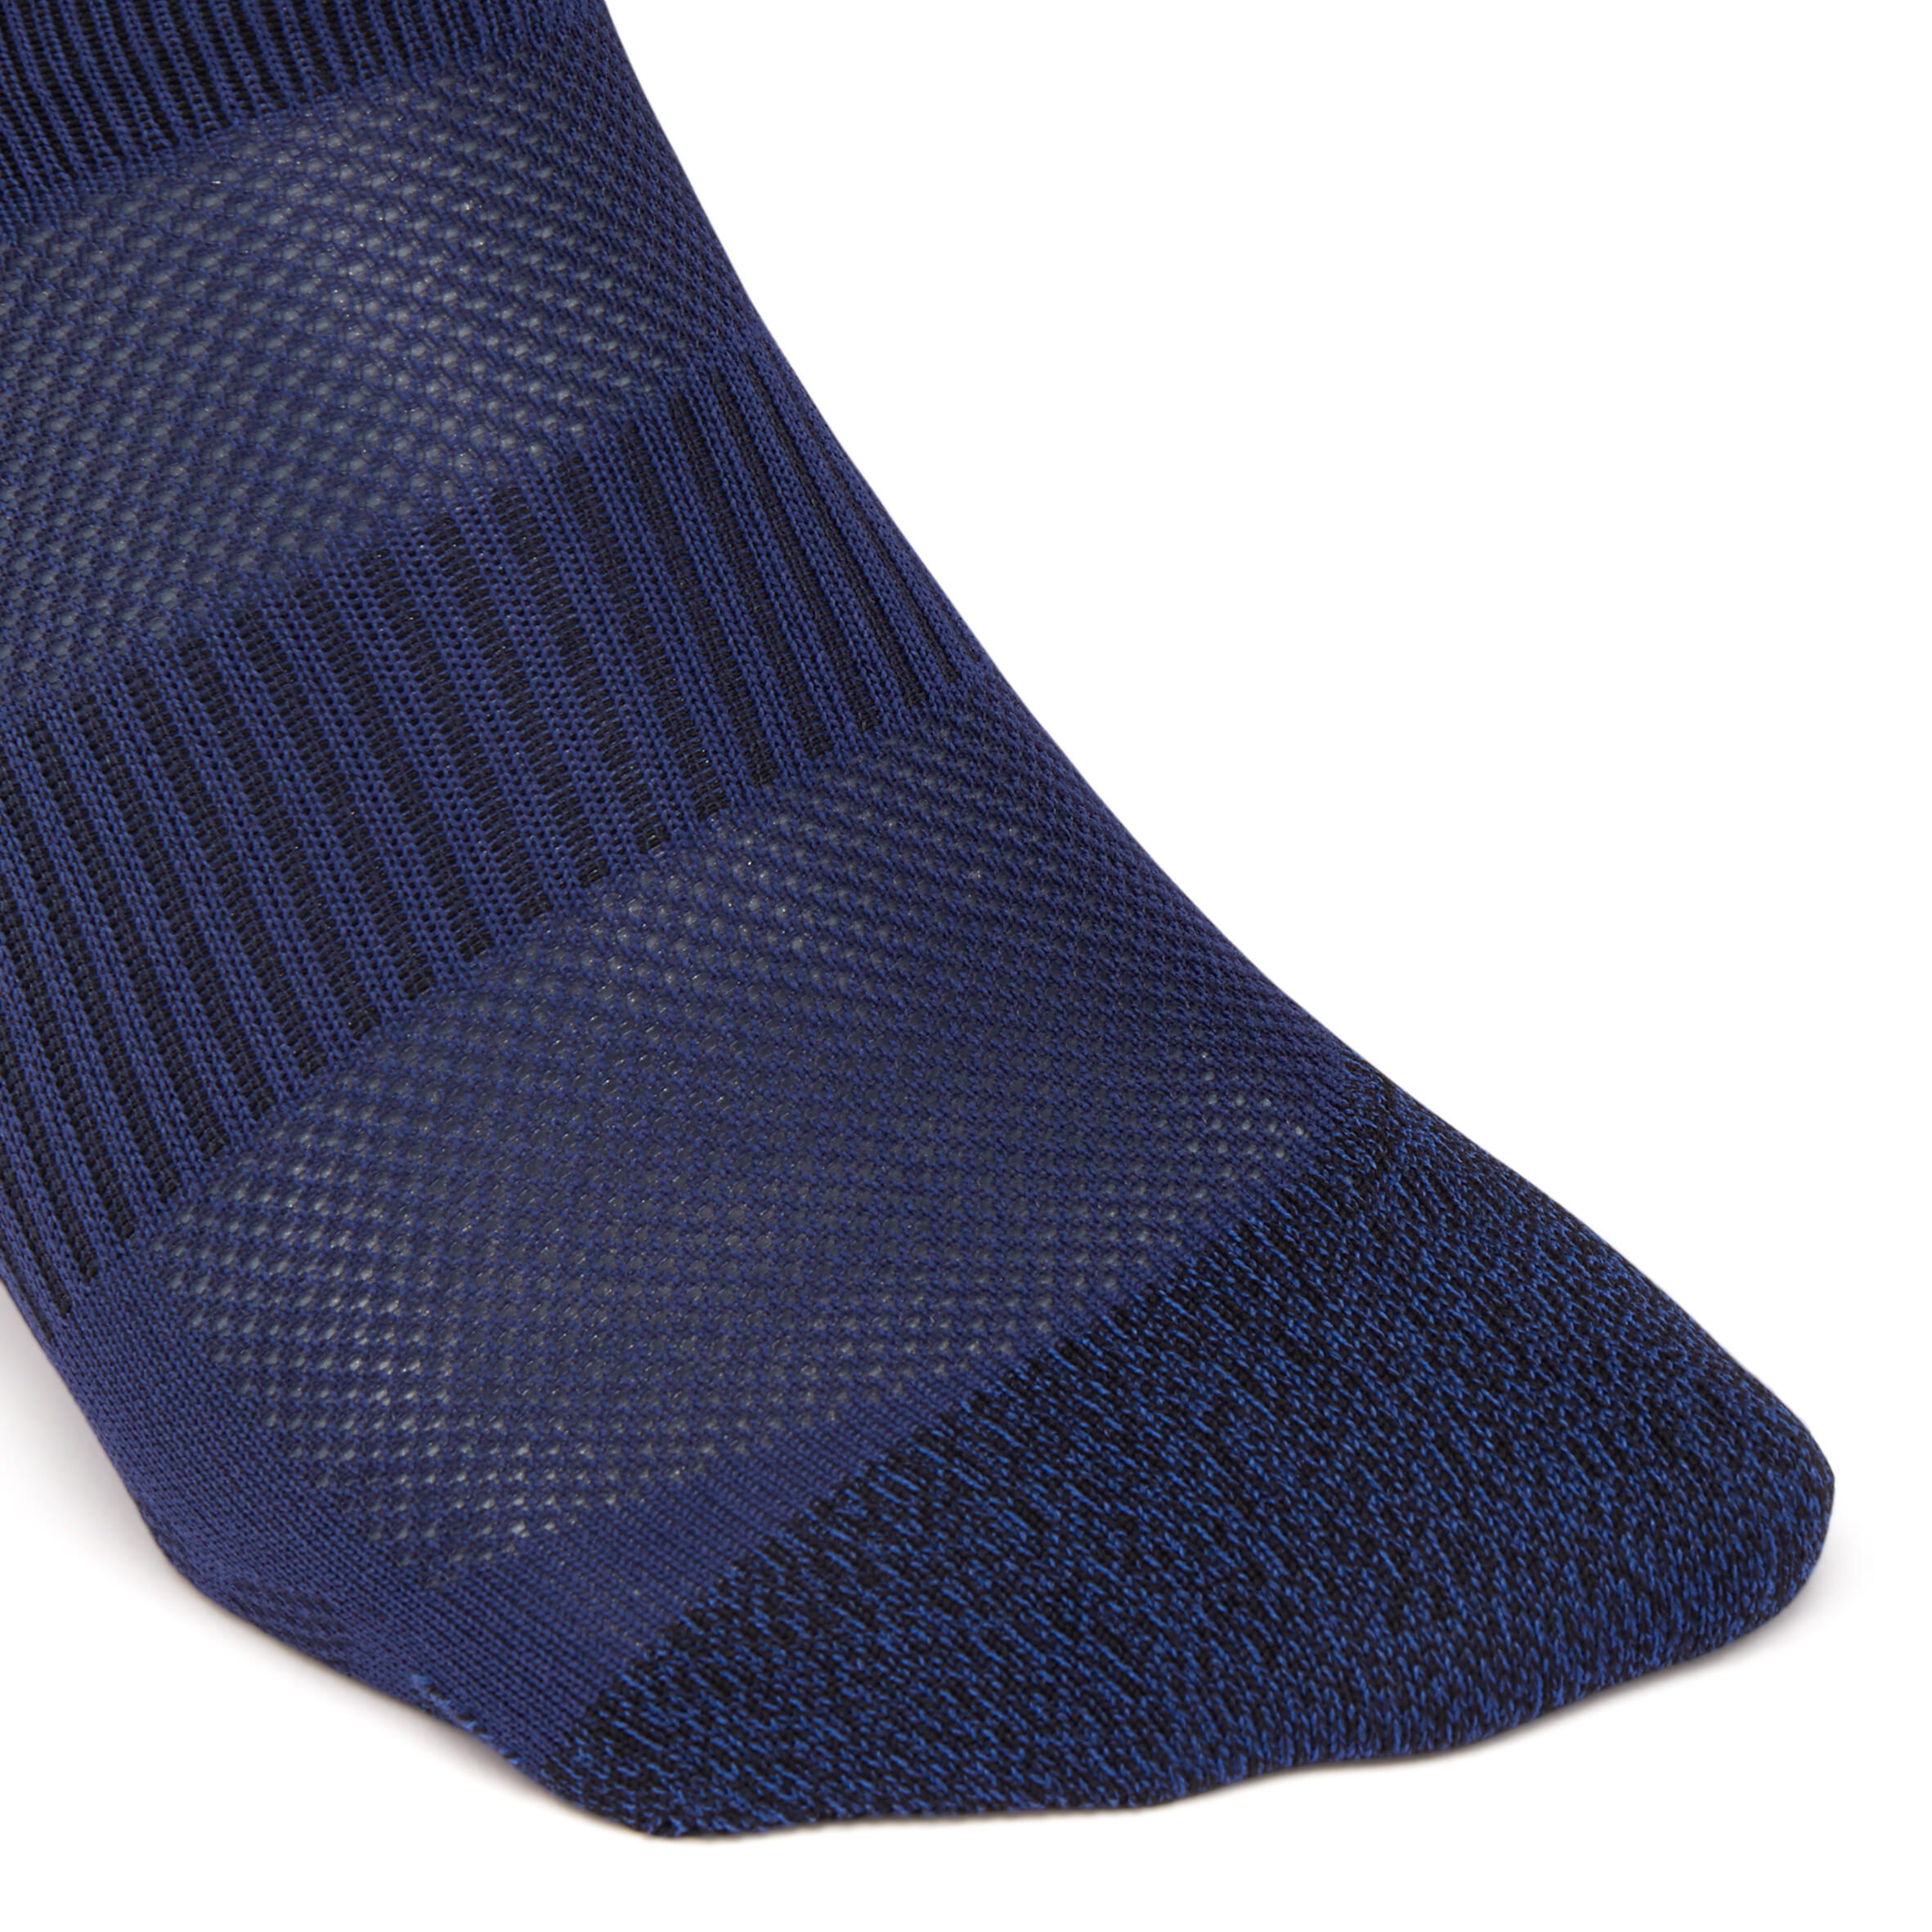 WS 500 Invisible Fresh Active and Nordinc Walking Socks - Blue/White/Blue 5/6